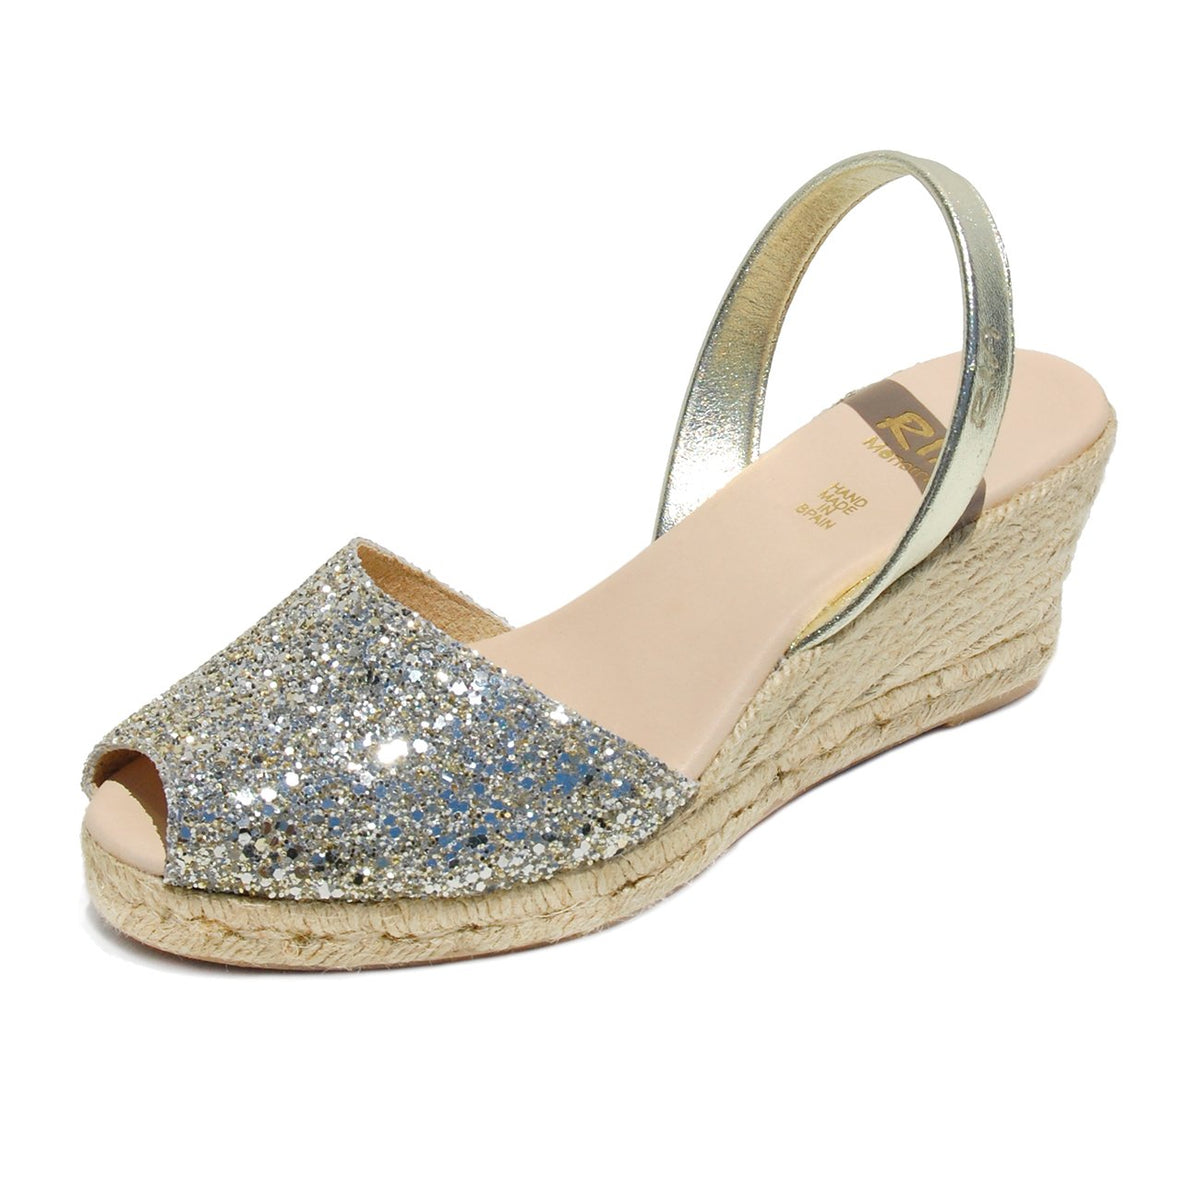 Parallel Culture Shoes and Fashion Online WEDGES RIA MENORCA LLUNA GLITTER WEDGE